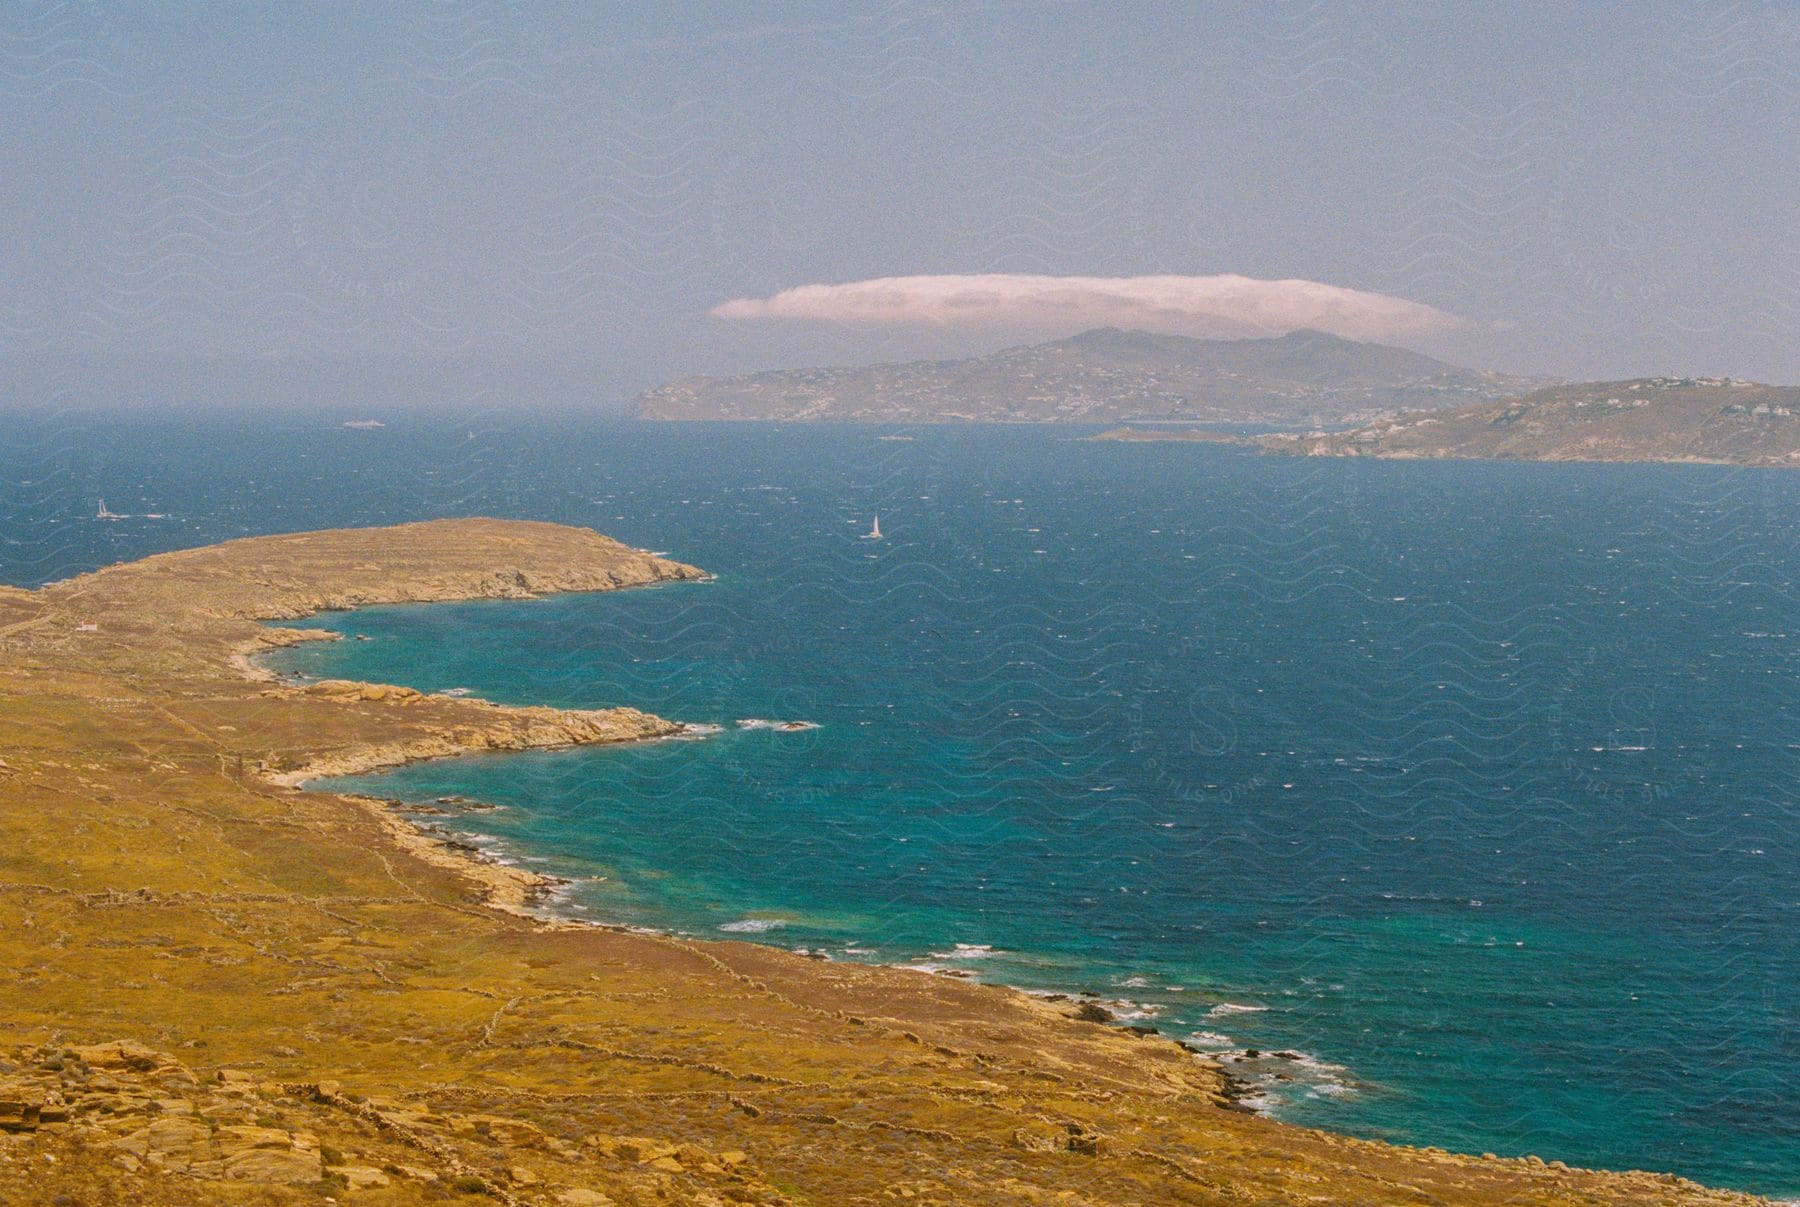 An island is situated between the bright blue water and another island.